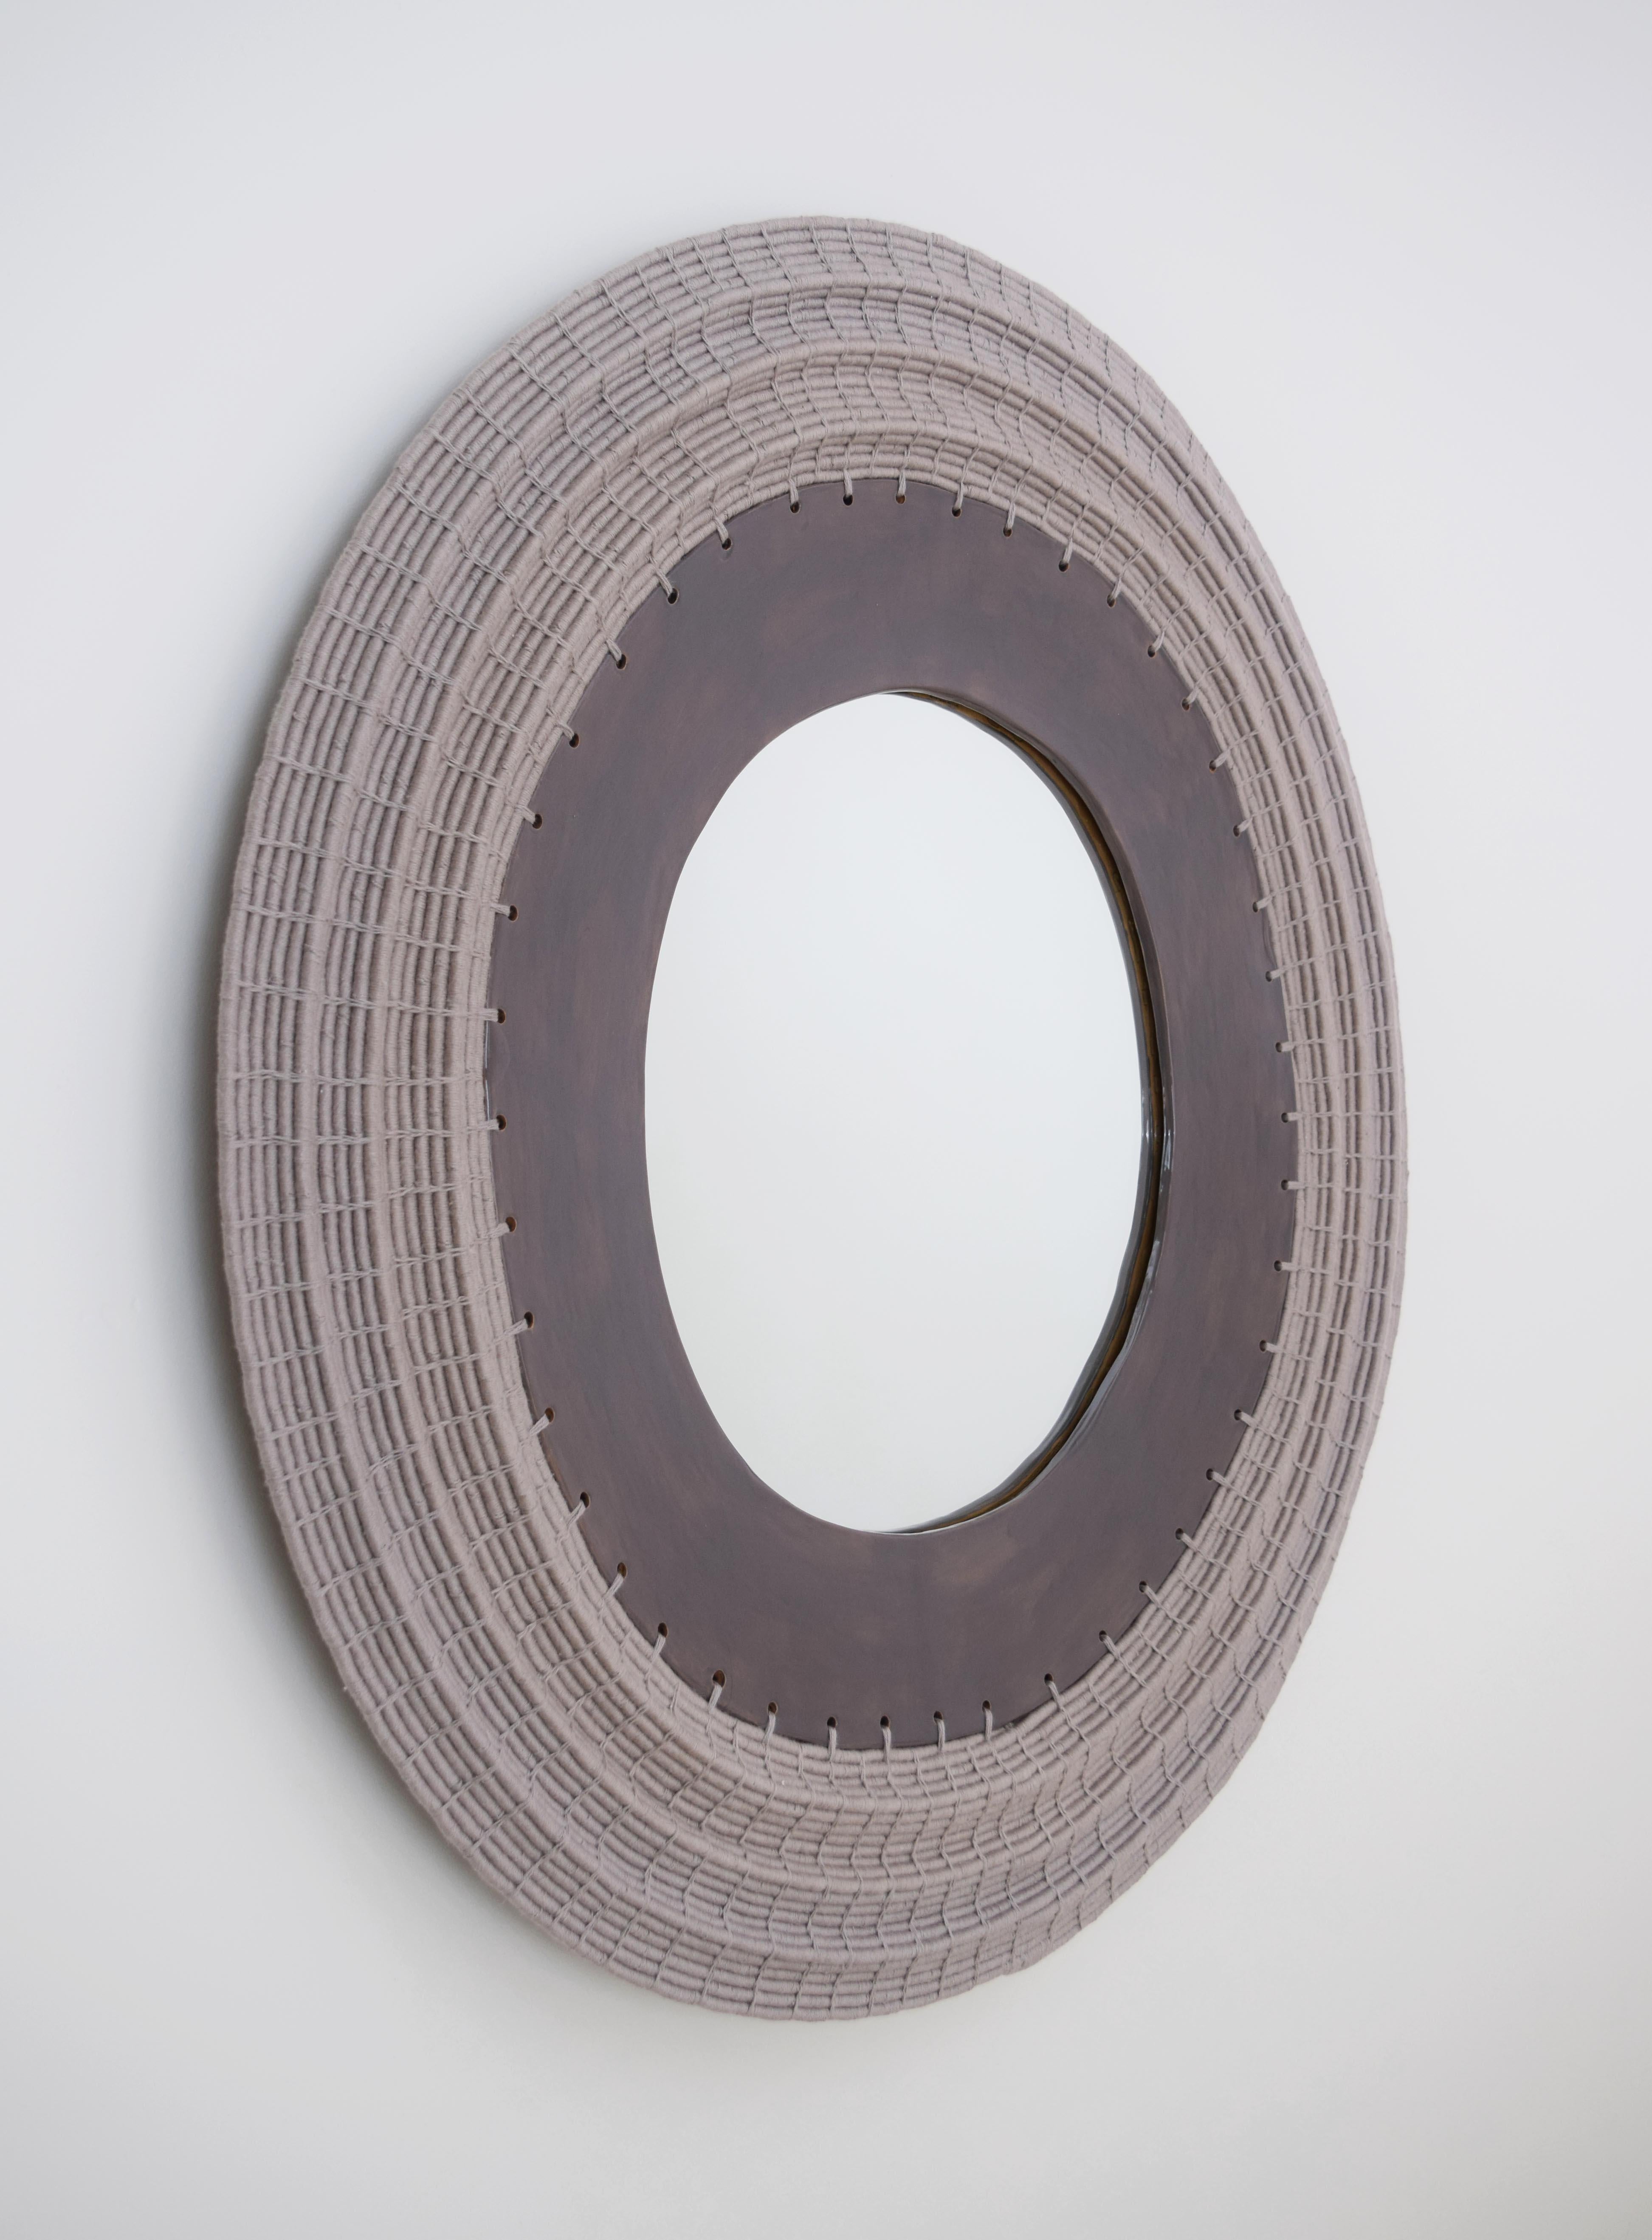 Made to order, and perfect for hanging in an entryway or in a powder room, this decorative mirror features a woven frame with an undulating, dimensional effect.

Hand formed stoneware frame. Woven cotton exterior frame. Black felt backing, hanging